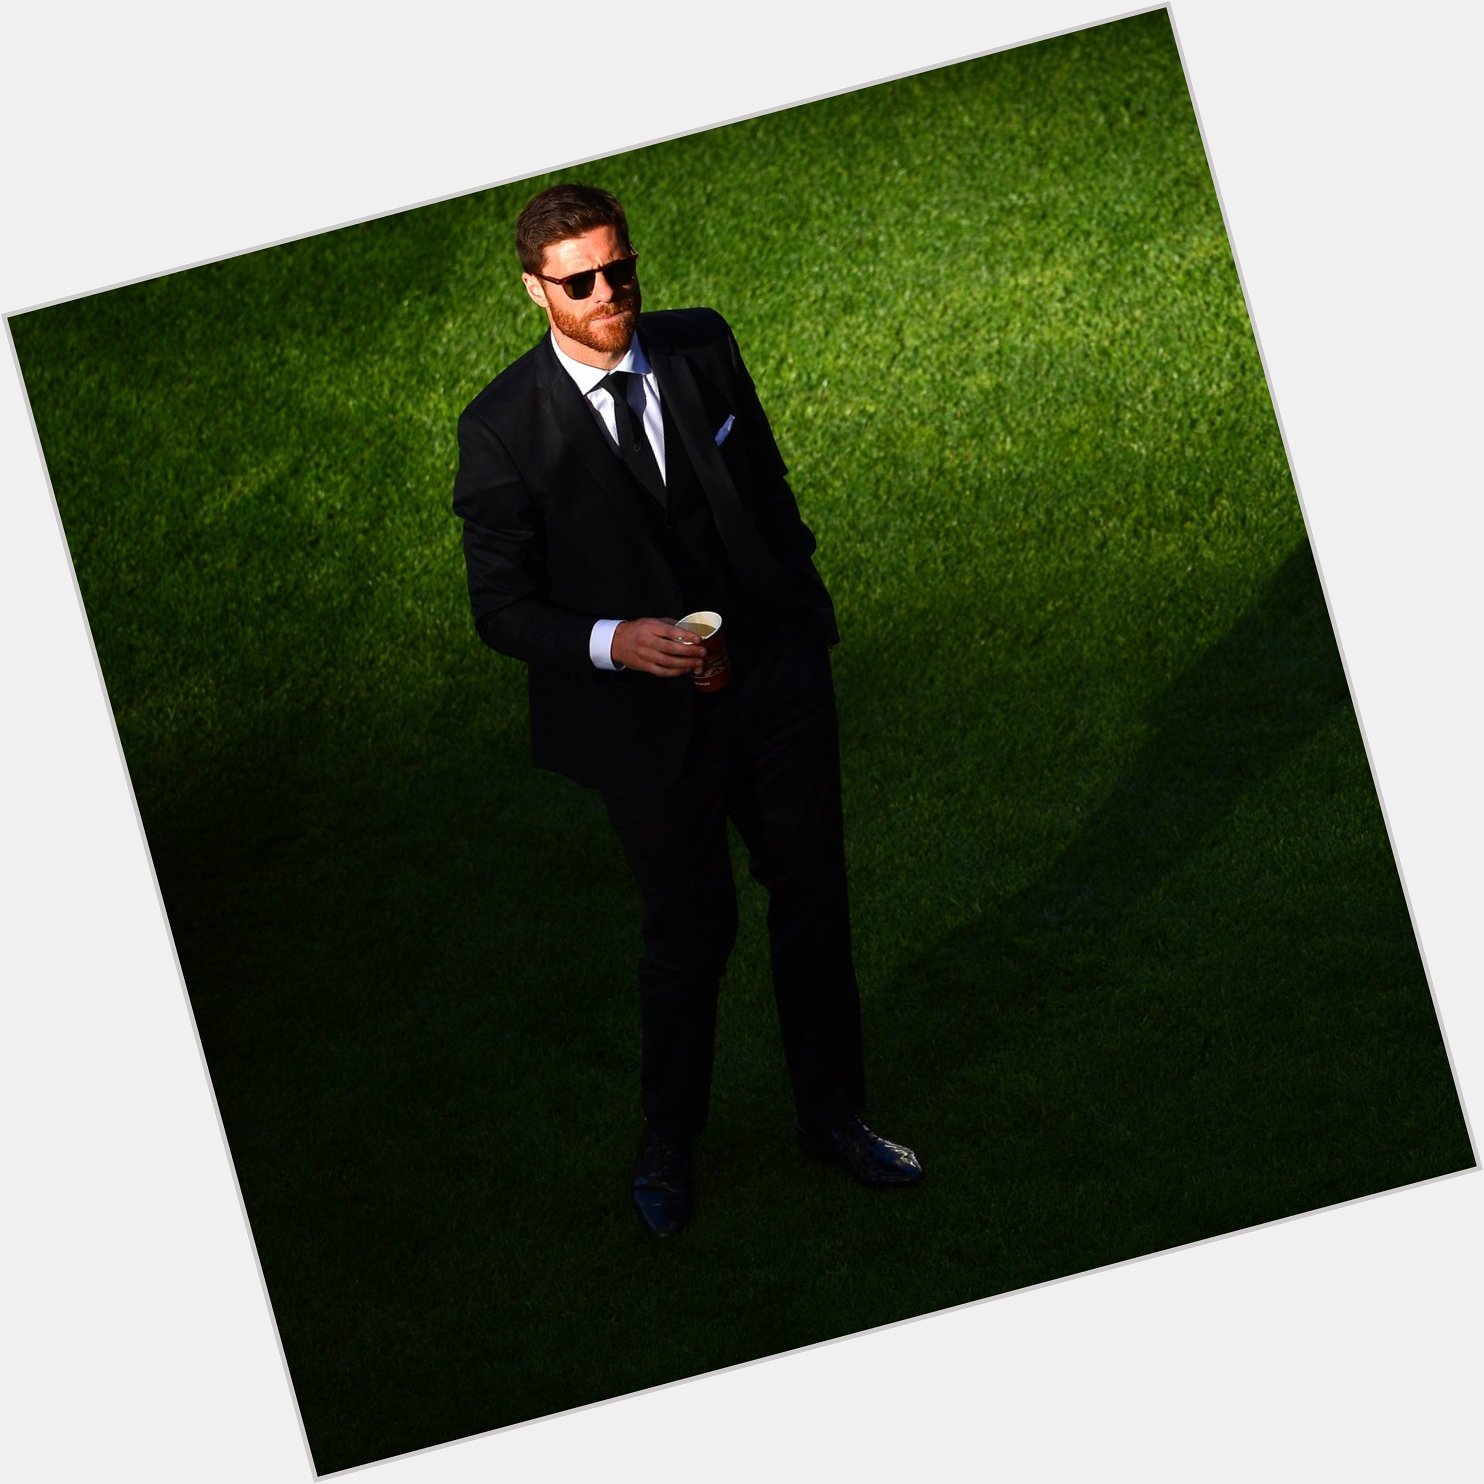 Happy 40th Birthday to the coolest footballer ever. 

No one comes close to Xabi Alonso 